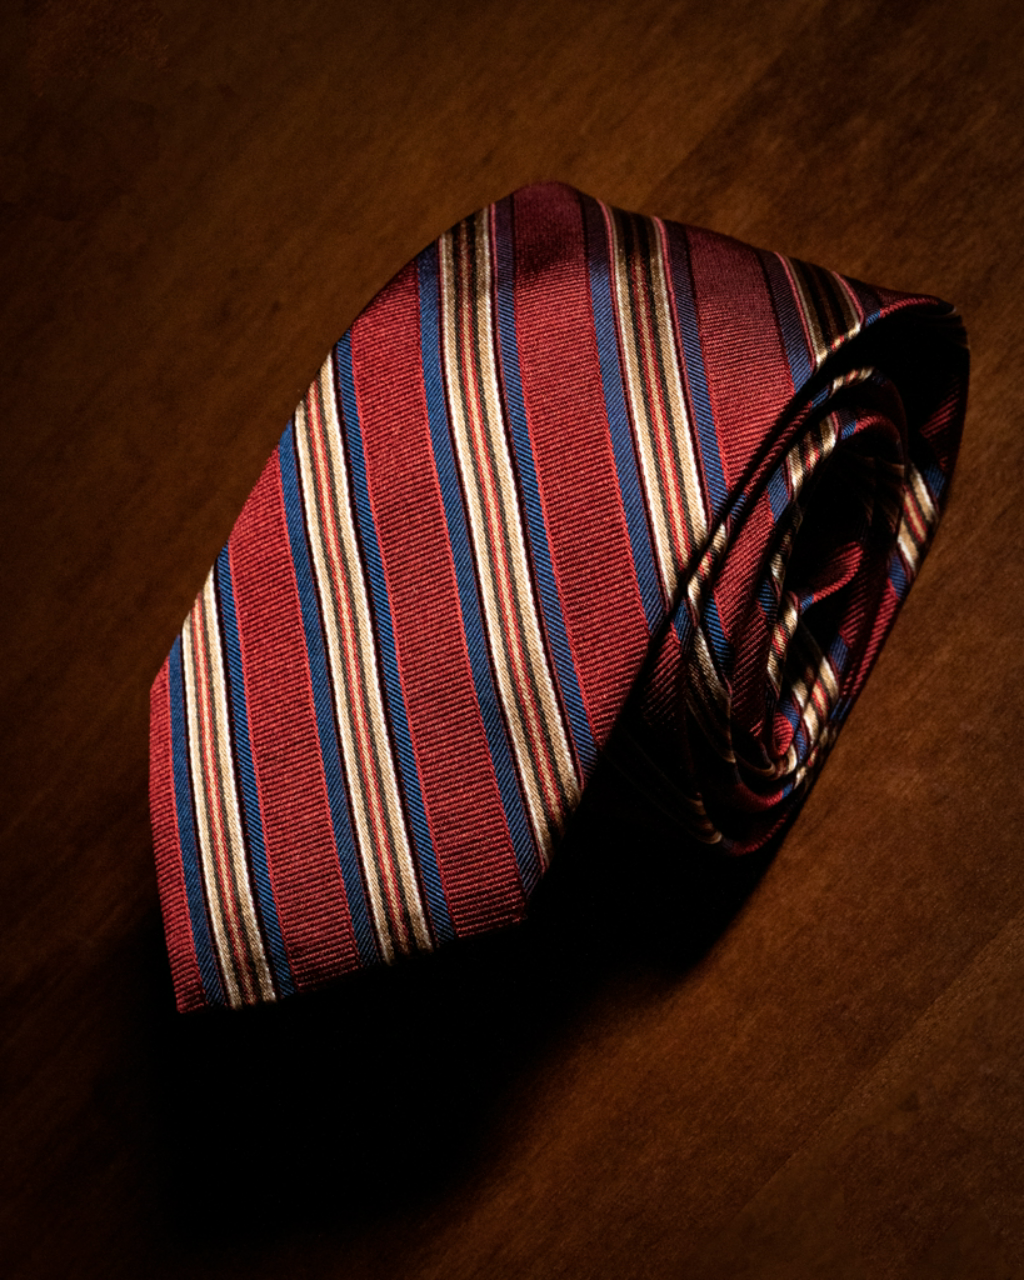 Agostino Red Tie With Blue and Gold Striped Pattern